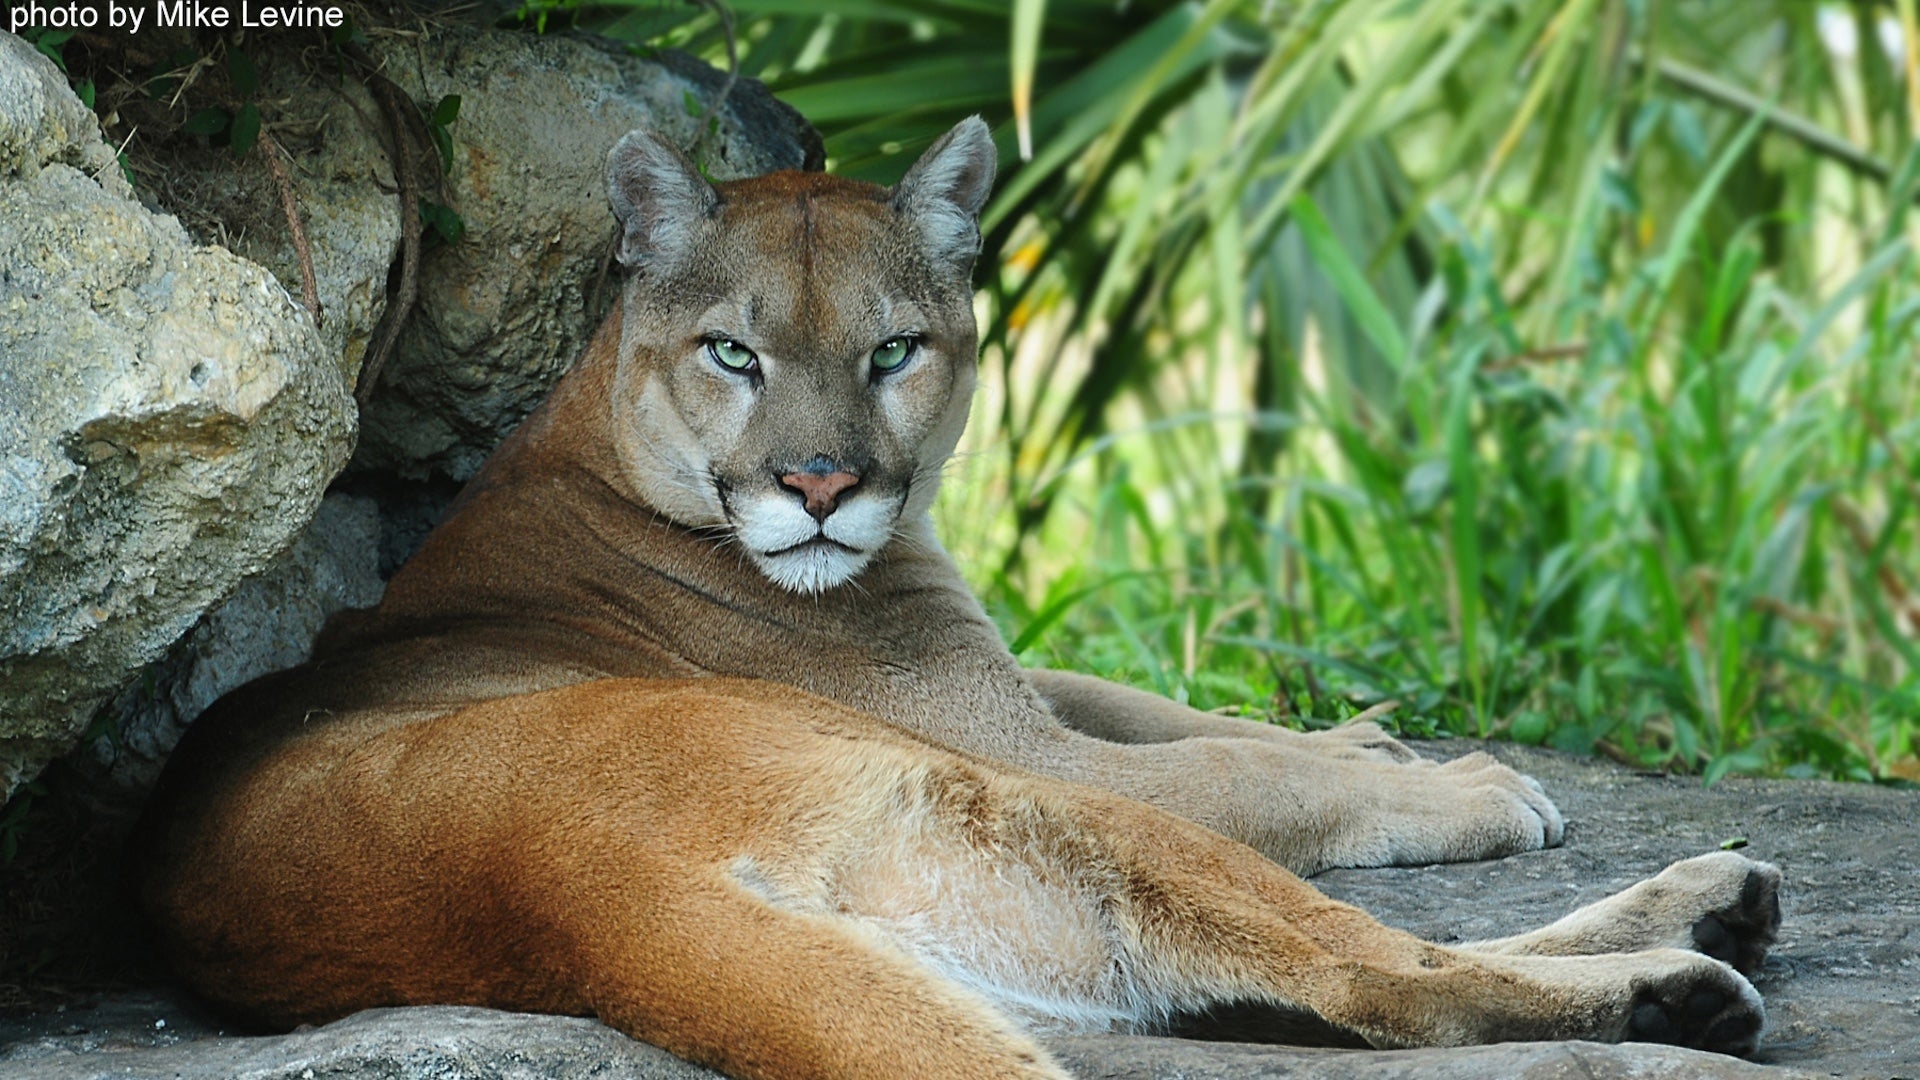 Panther lying next to a rock with greenery in the background